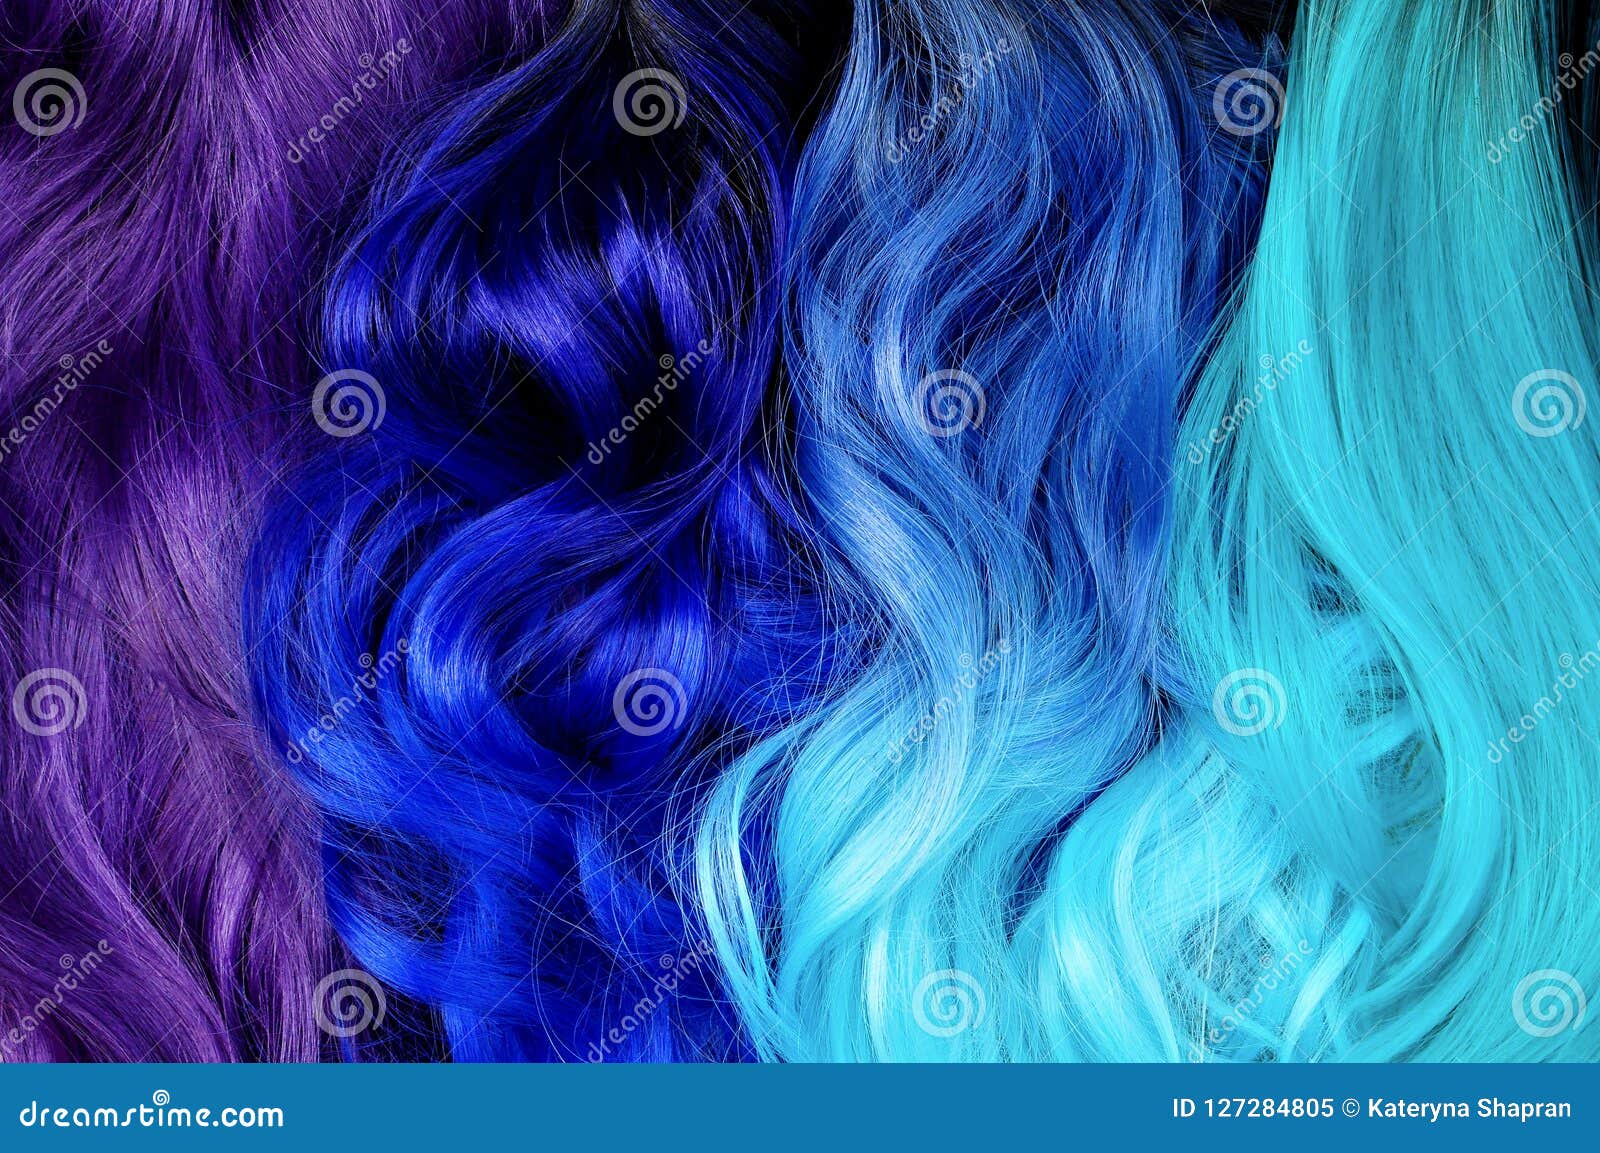 6. "Turquoise and Blue Hair: How to Choose the Right Shade for Your Skin Tone" - wide 9